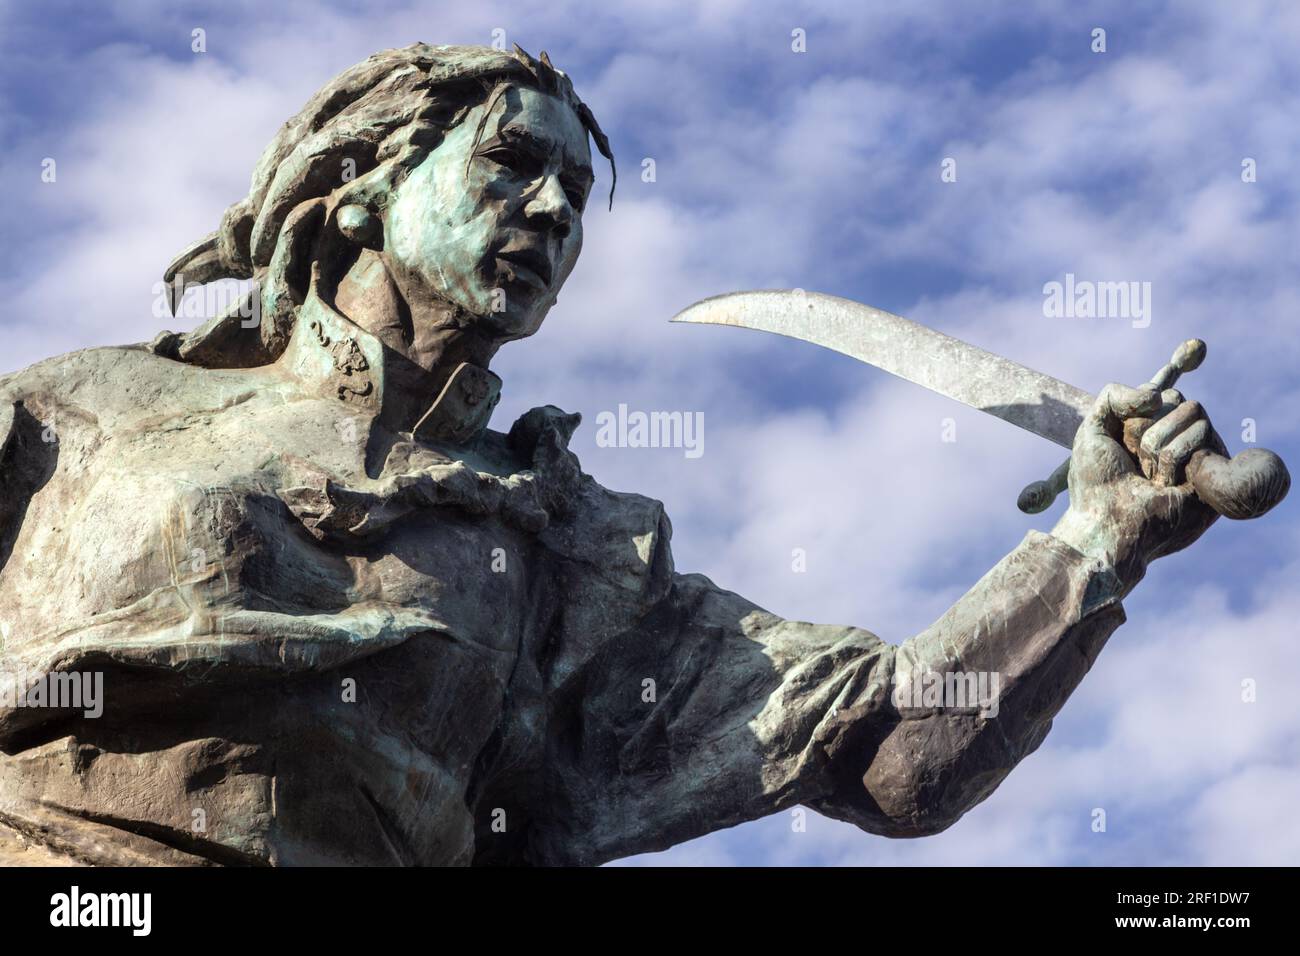 Juana Azarduy Guerilla Military Leader Holding Sword Monument, Blue Sky Background.  Art Statue at Kirchner Cultural Center Buenos Aires Argentina Stock Photo